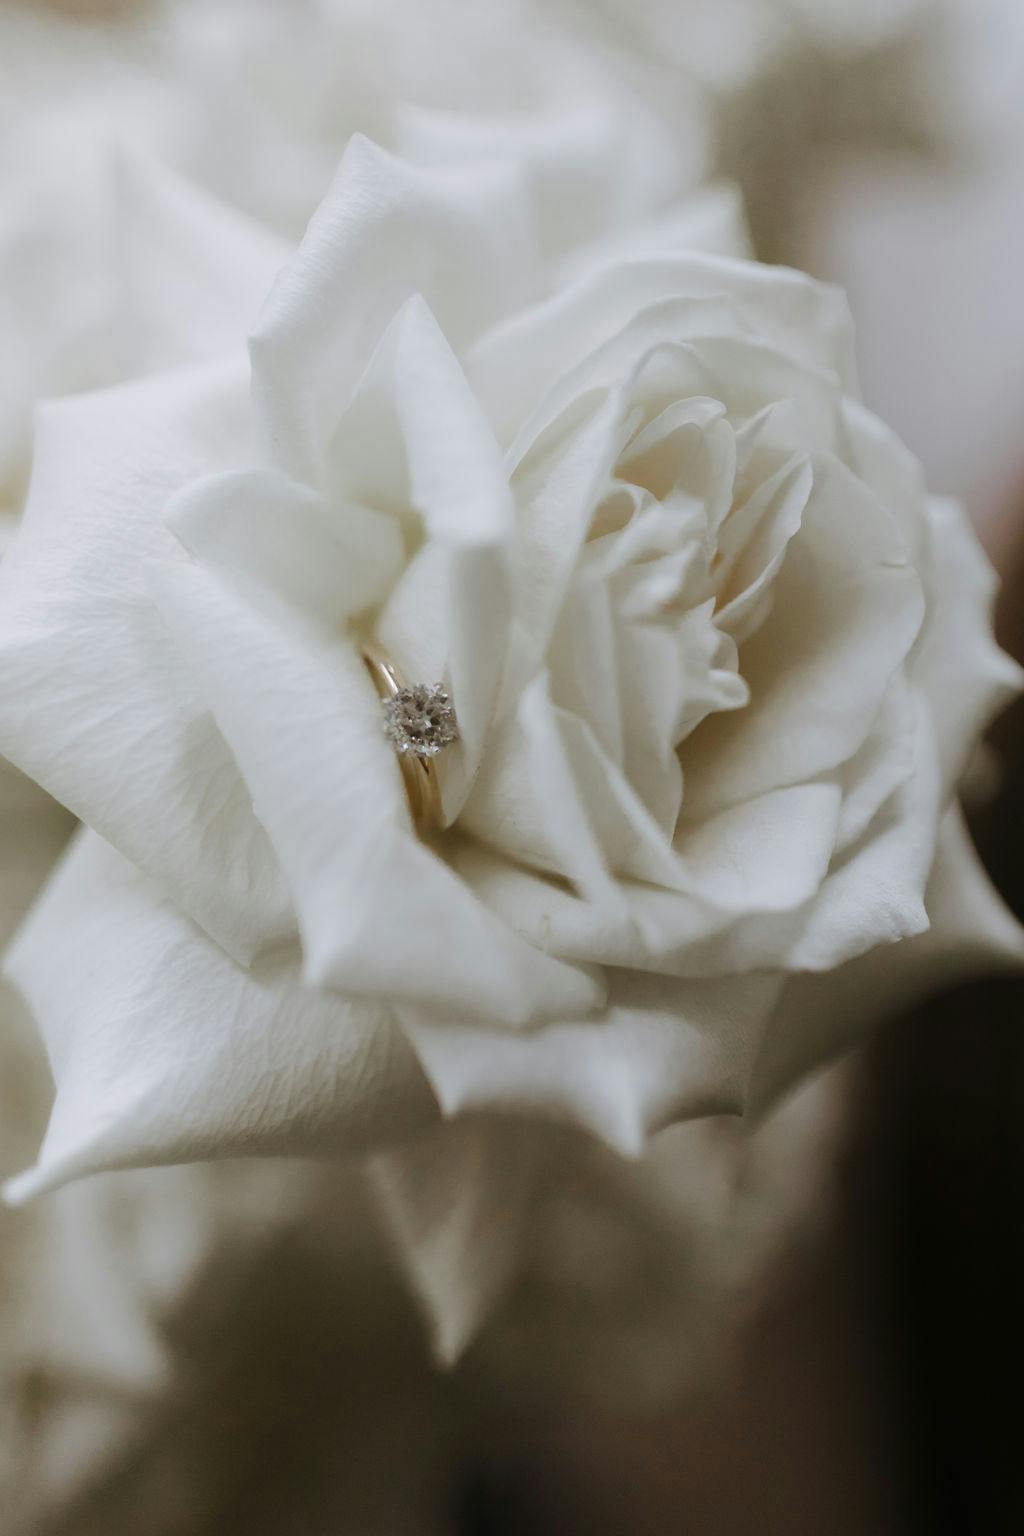 A close-up photograph of a delicate white rose with a gold engagement ring featuring a diamond nestled gently in the center of the flower. The petals of the rose are soft and slightly crinkled, adding texture to the elegant display.